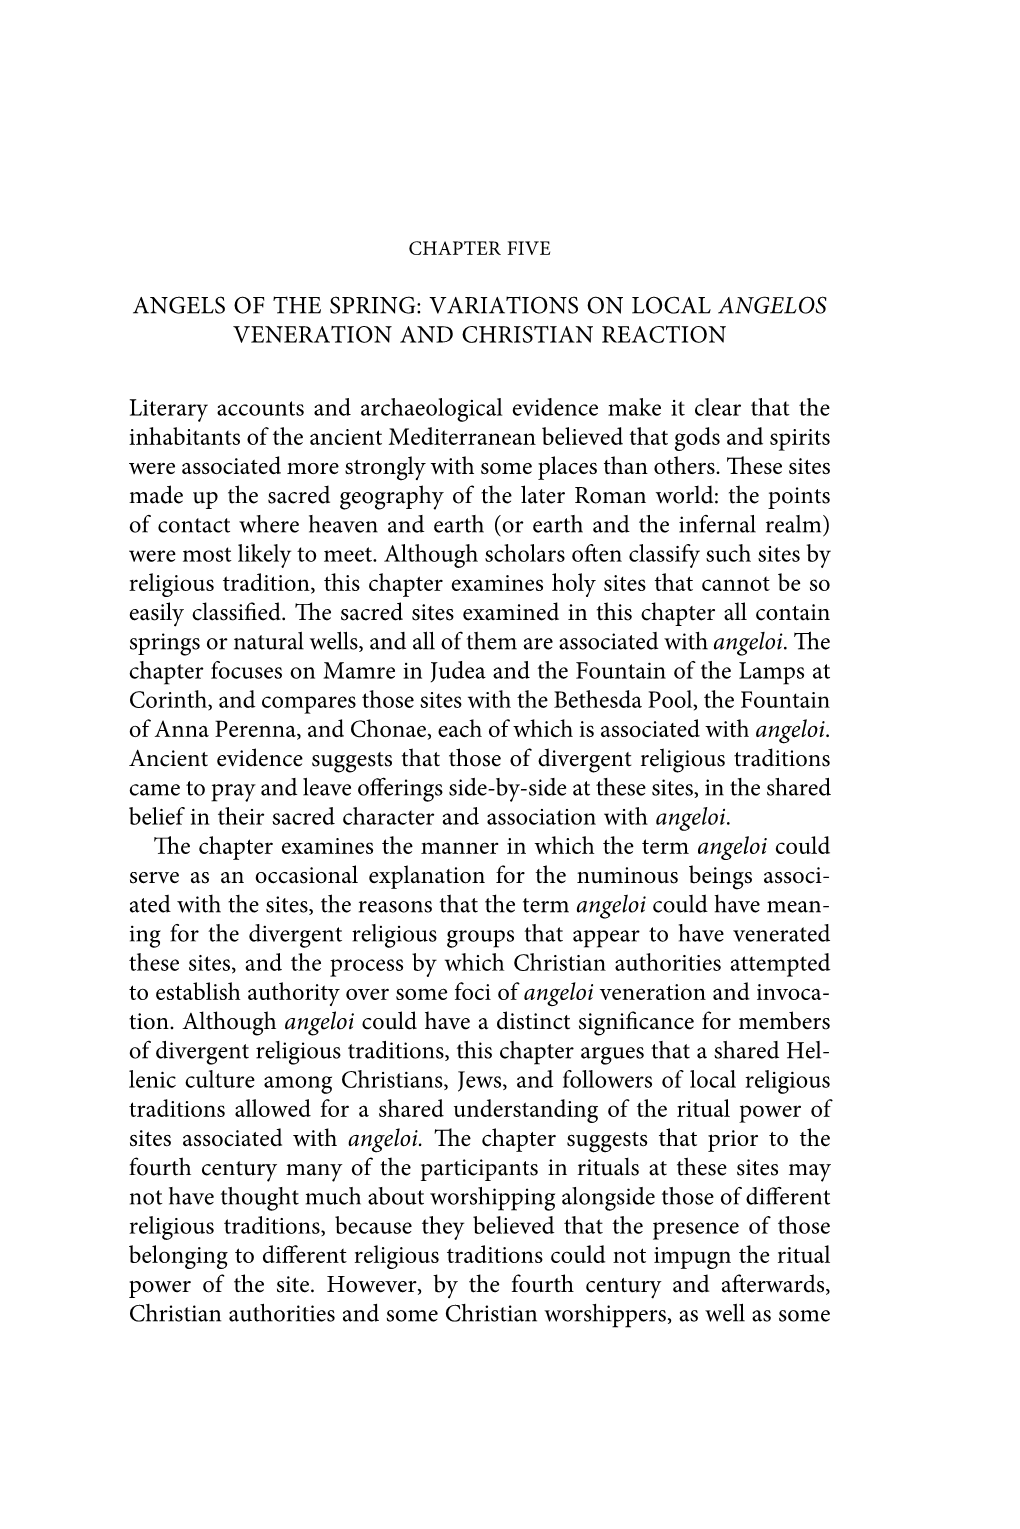 Variations on Local Angelos Veneration and Christian Reaction